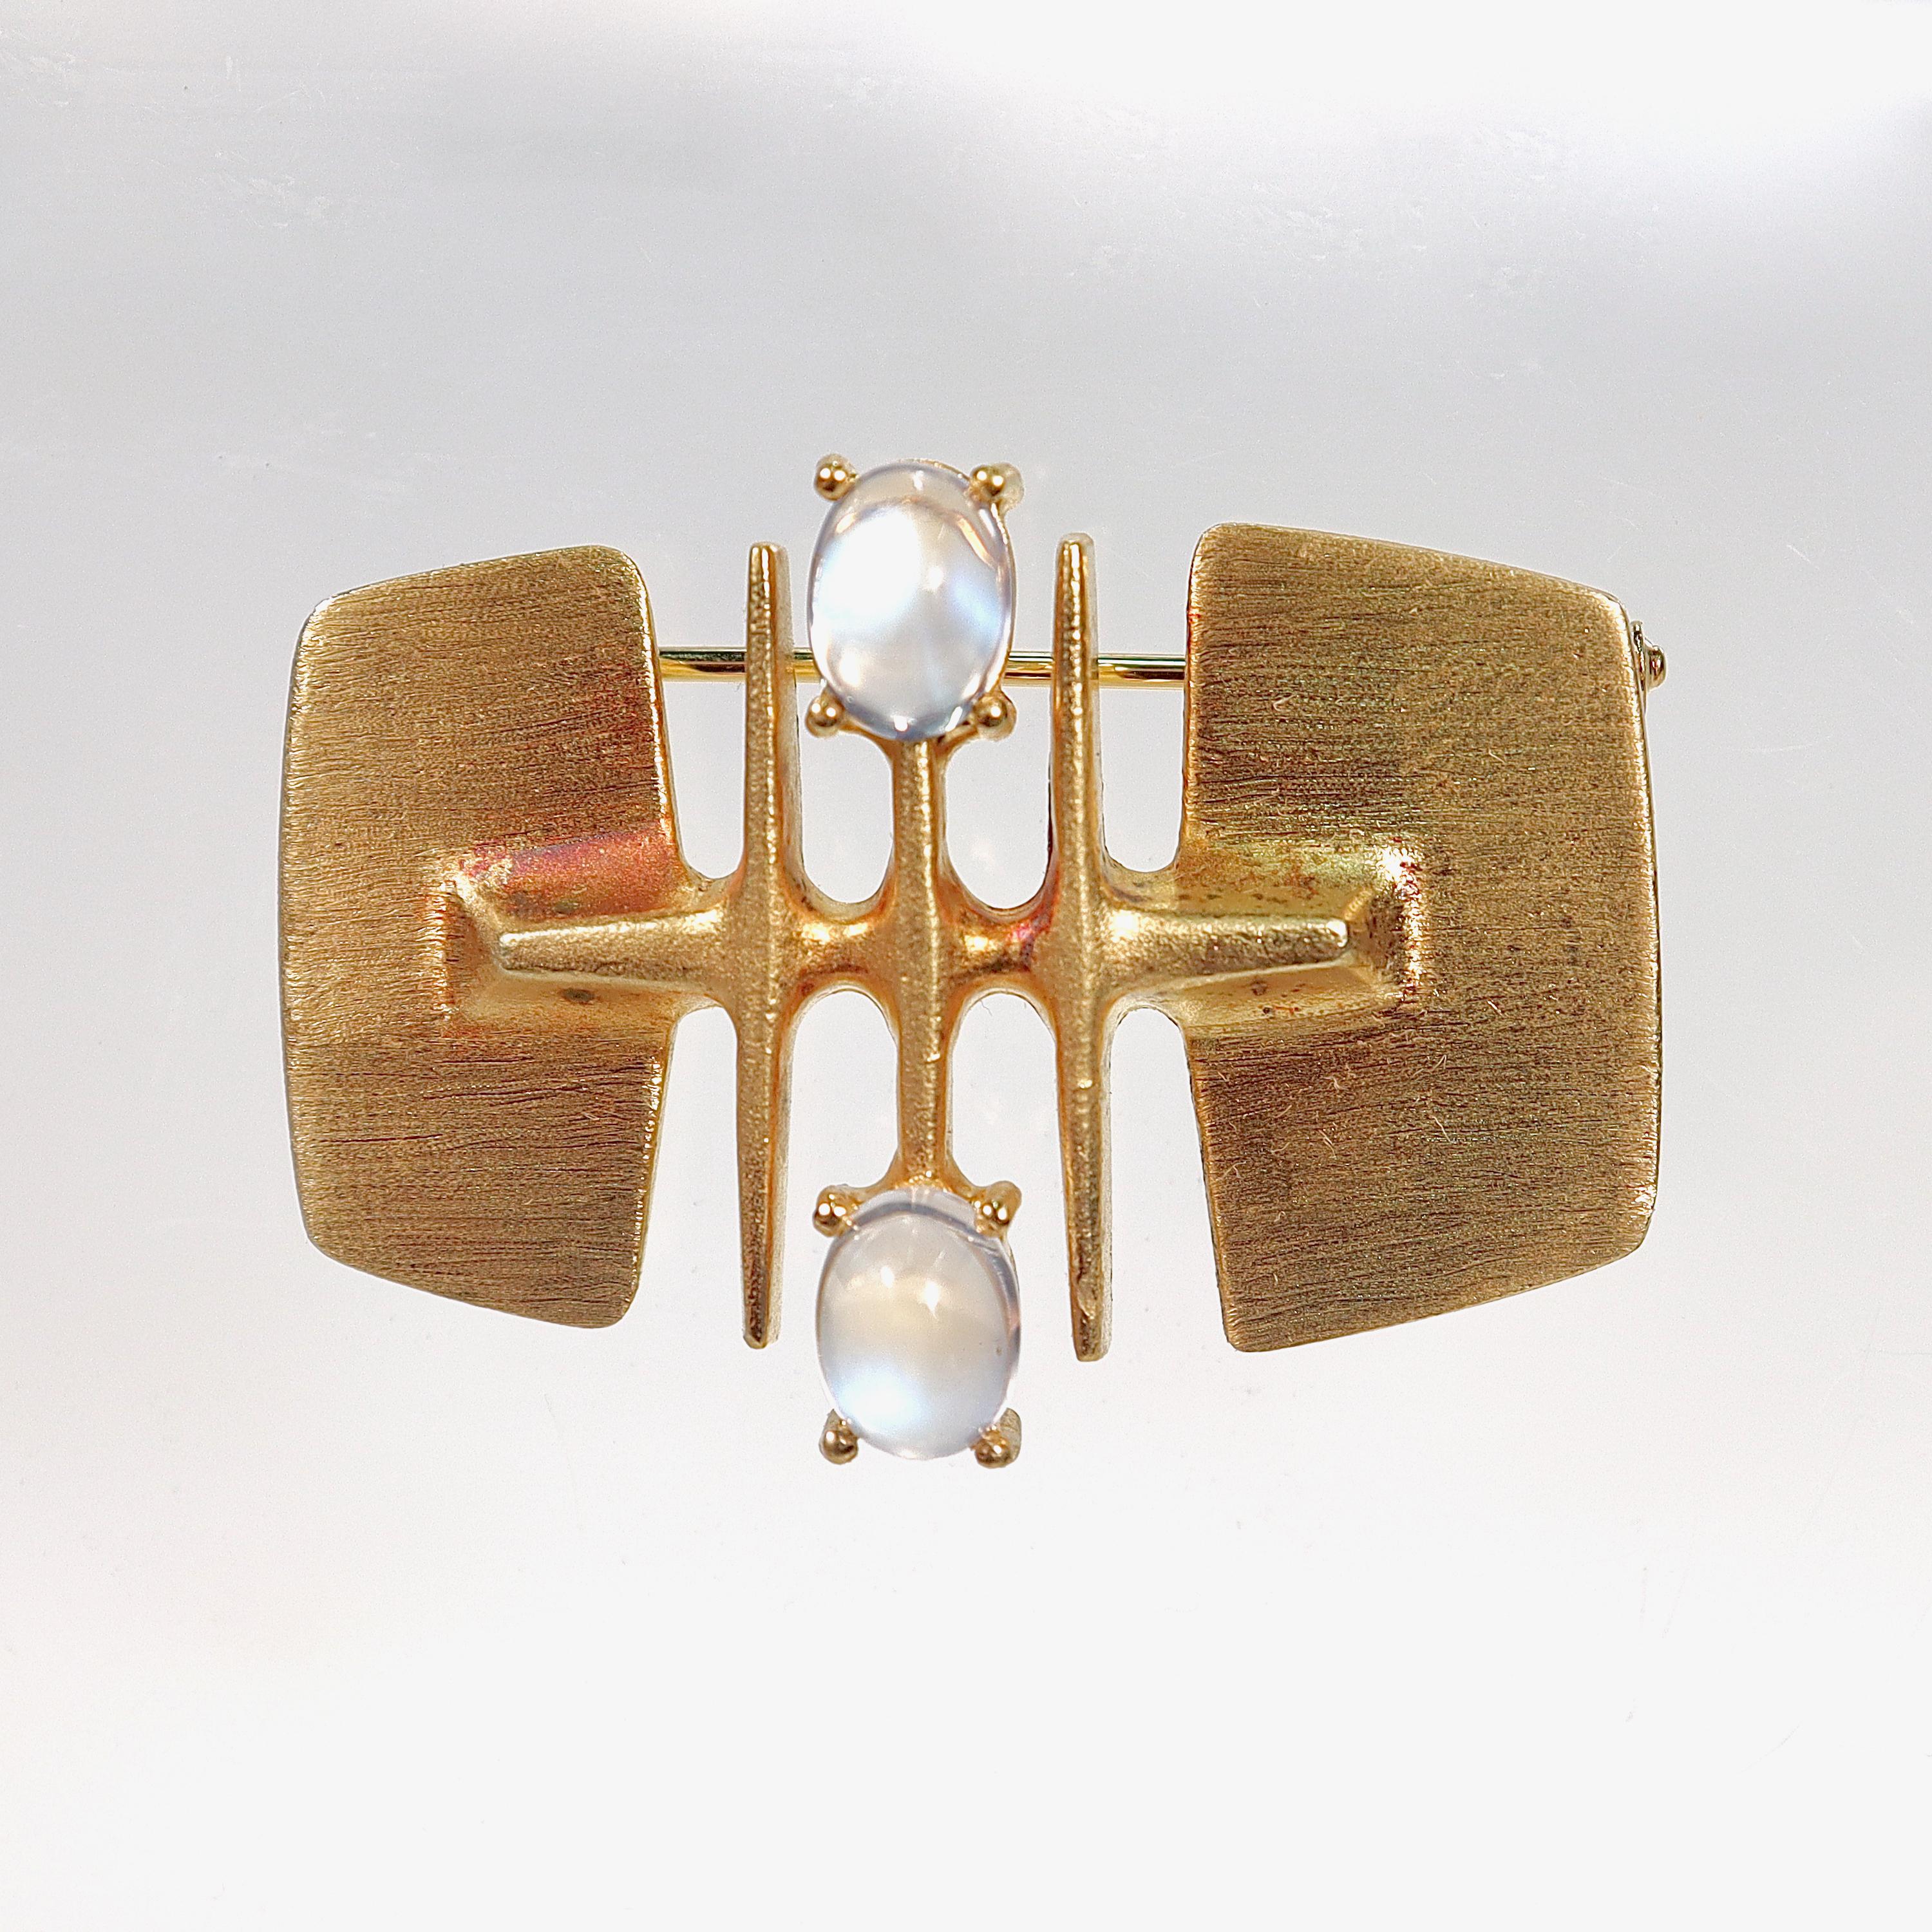 A fine German modernist brooch.

In 14 karat brush finished & high polished yellow gold 

With smooth oval moonstone cabochons prong set to both top and bottom. 

Marked 585 for 14k gold fineness and likely German. 

Simply a wonderful Modernist